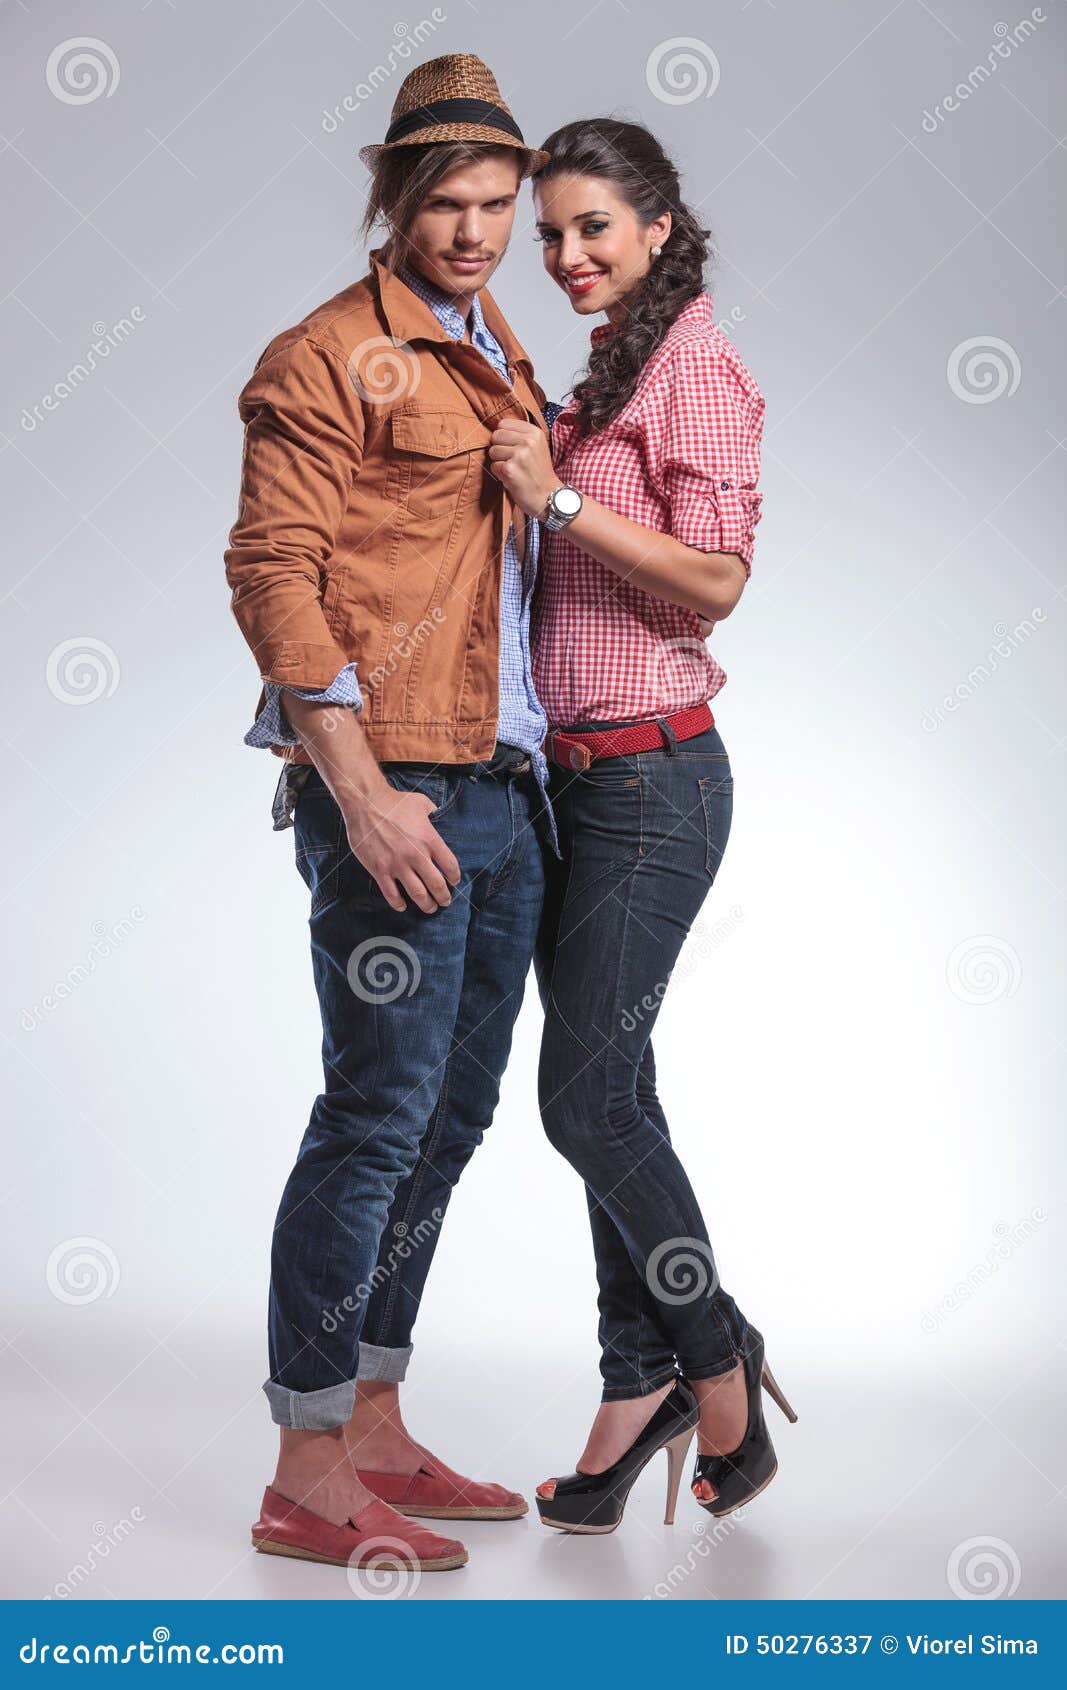 Fashion Couple in a Pose Looking To Their Side Stock Image - Image of hand,  attractive: 39546211